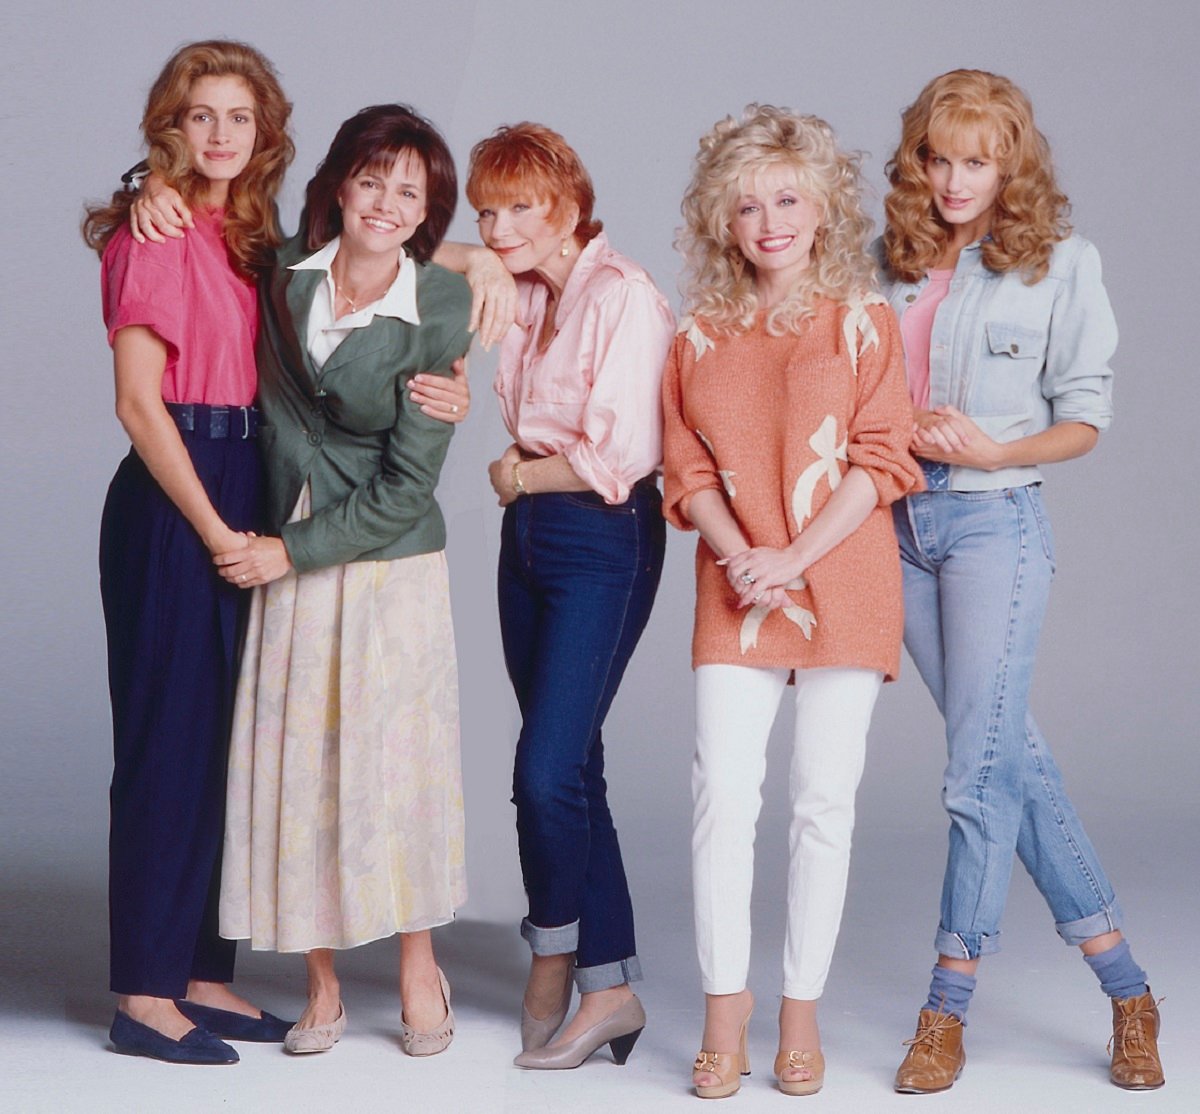 Julia Roberts, Sally Field, Shirley MacClaine, Dolly Parton and Daryl Hannah pose together for promotional photos for the 1989 blockbuster 'Steel Magnolias'